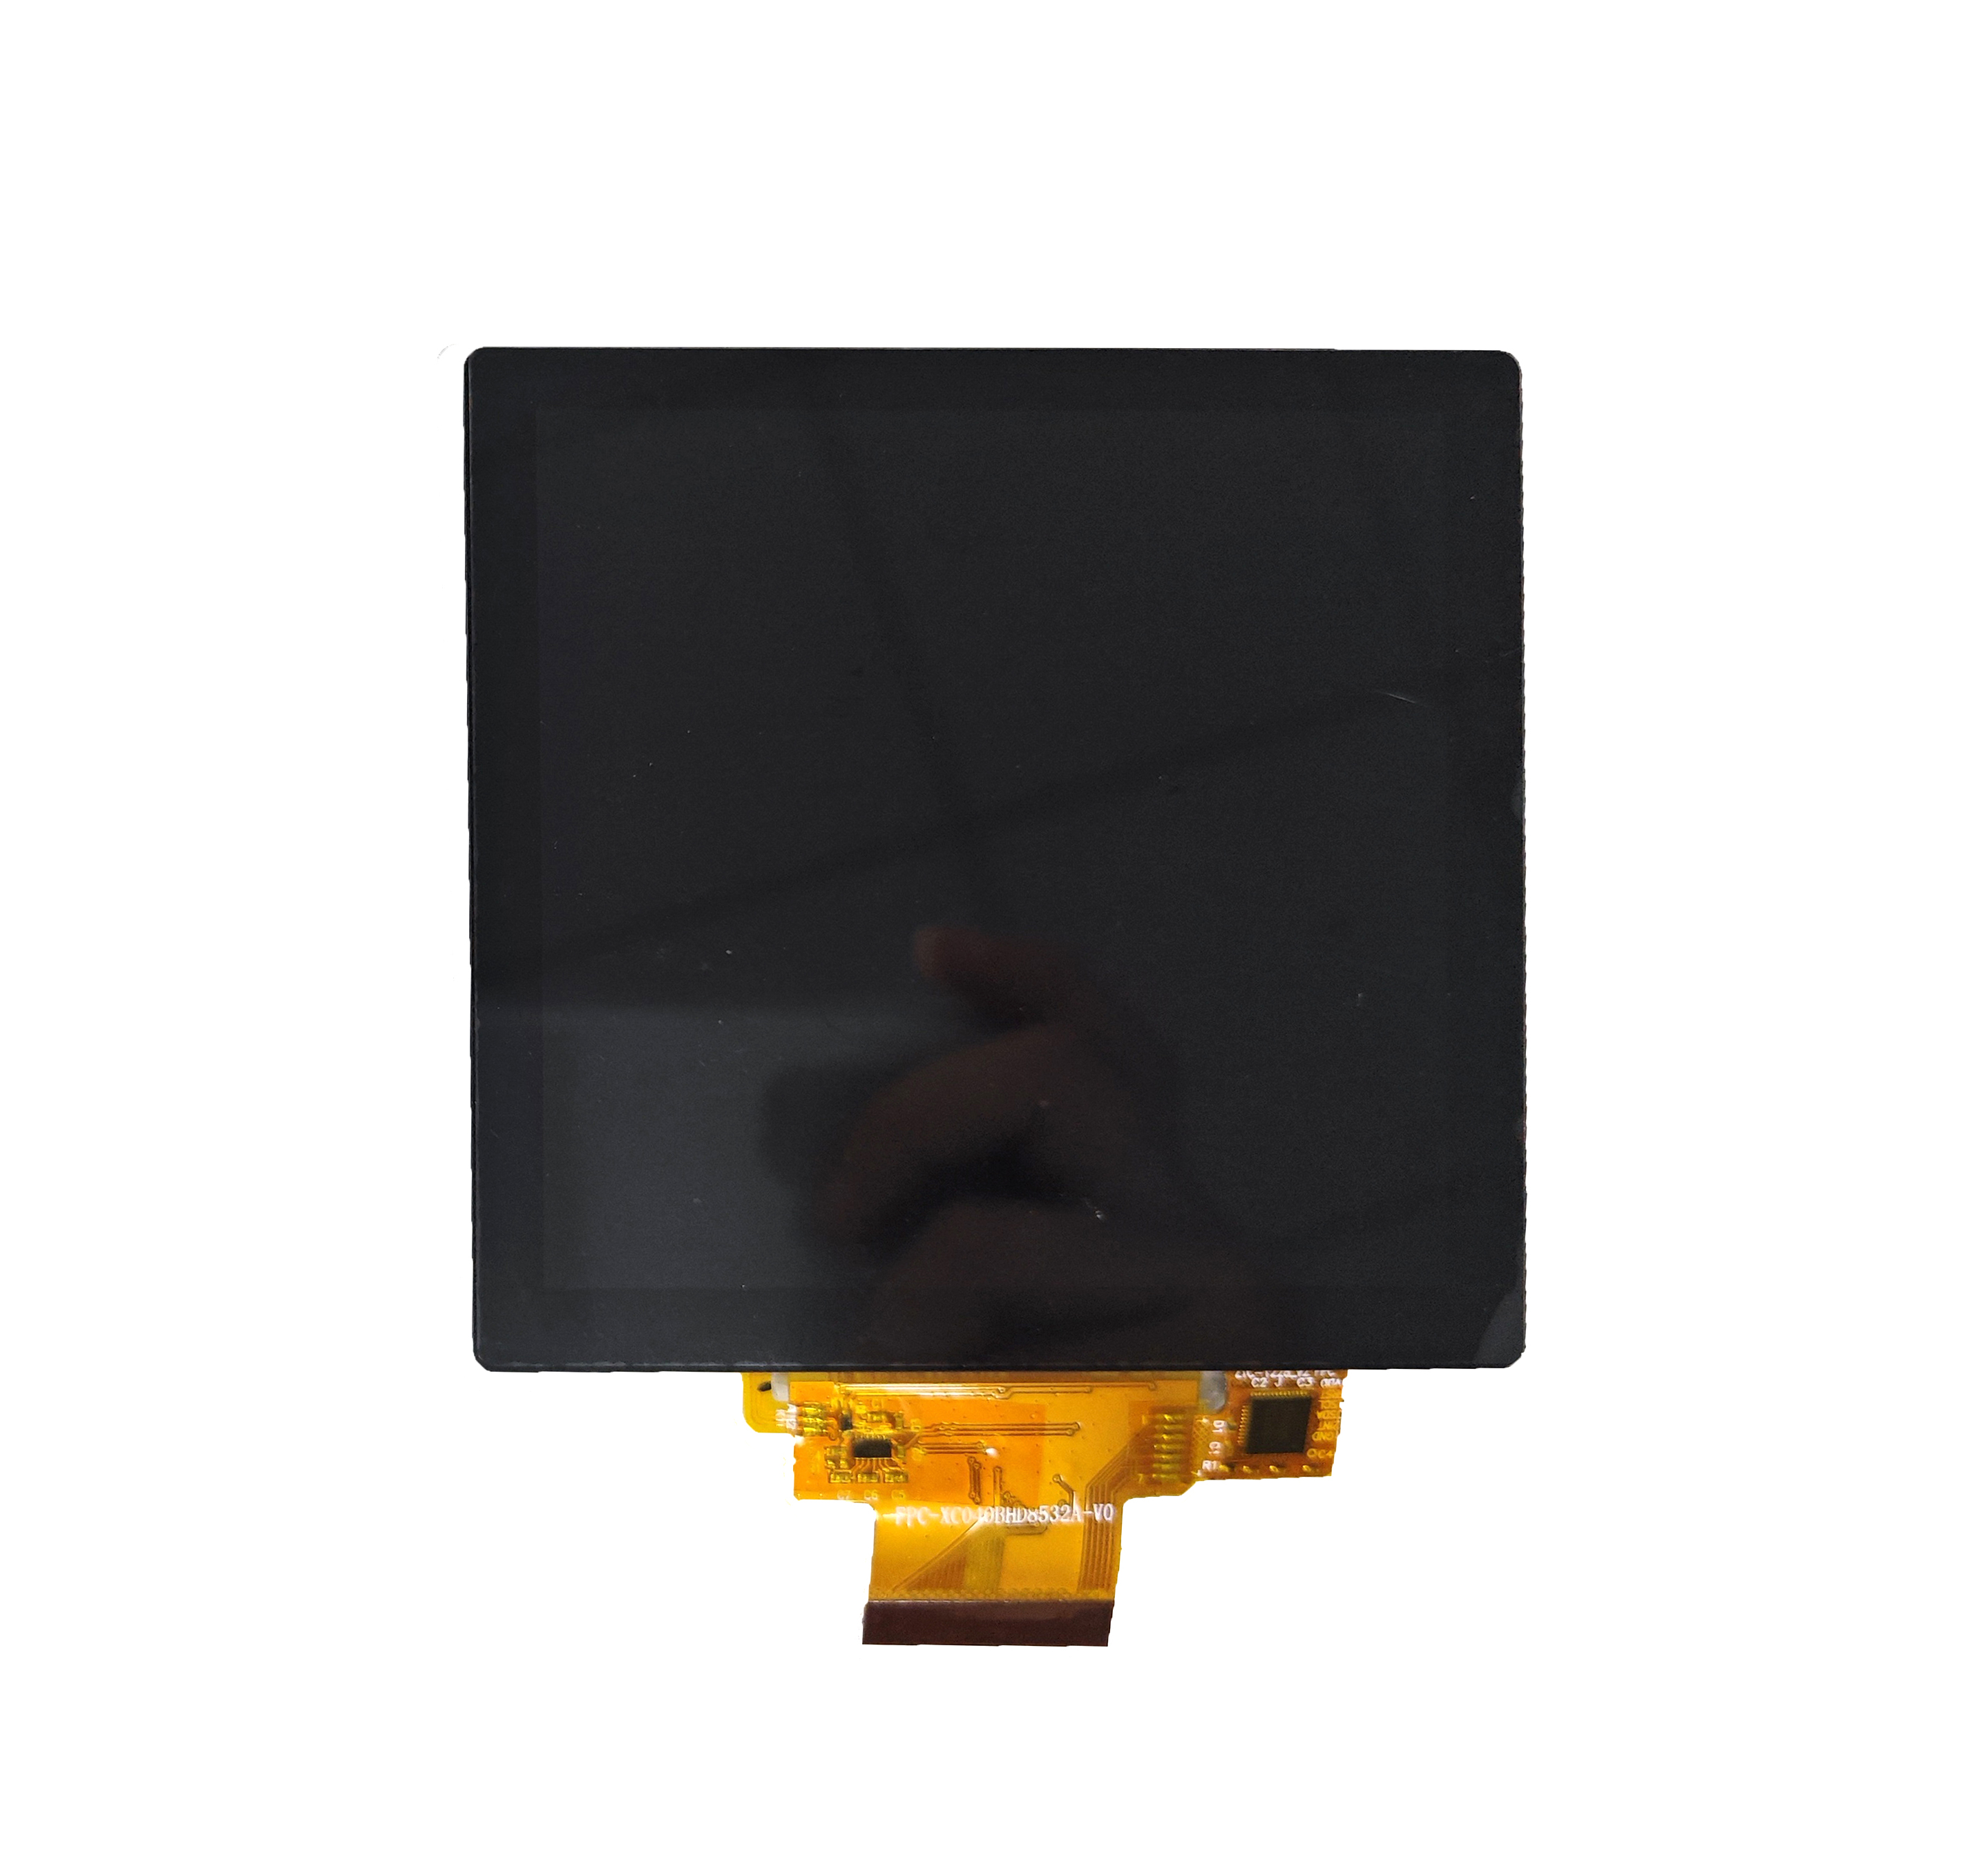 4.0 Inch TFT LCD IPS 720x720 resolution 40 pin square tft LCD module for Smart home controller